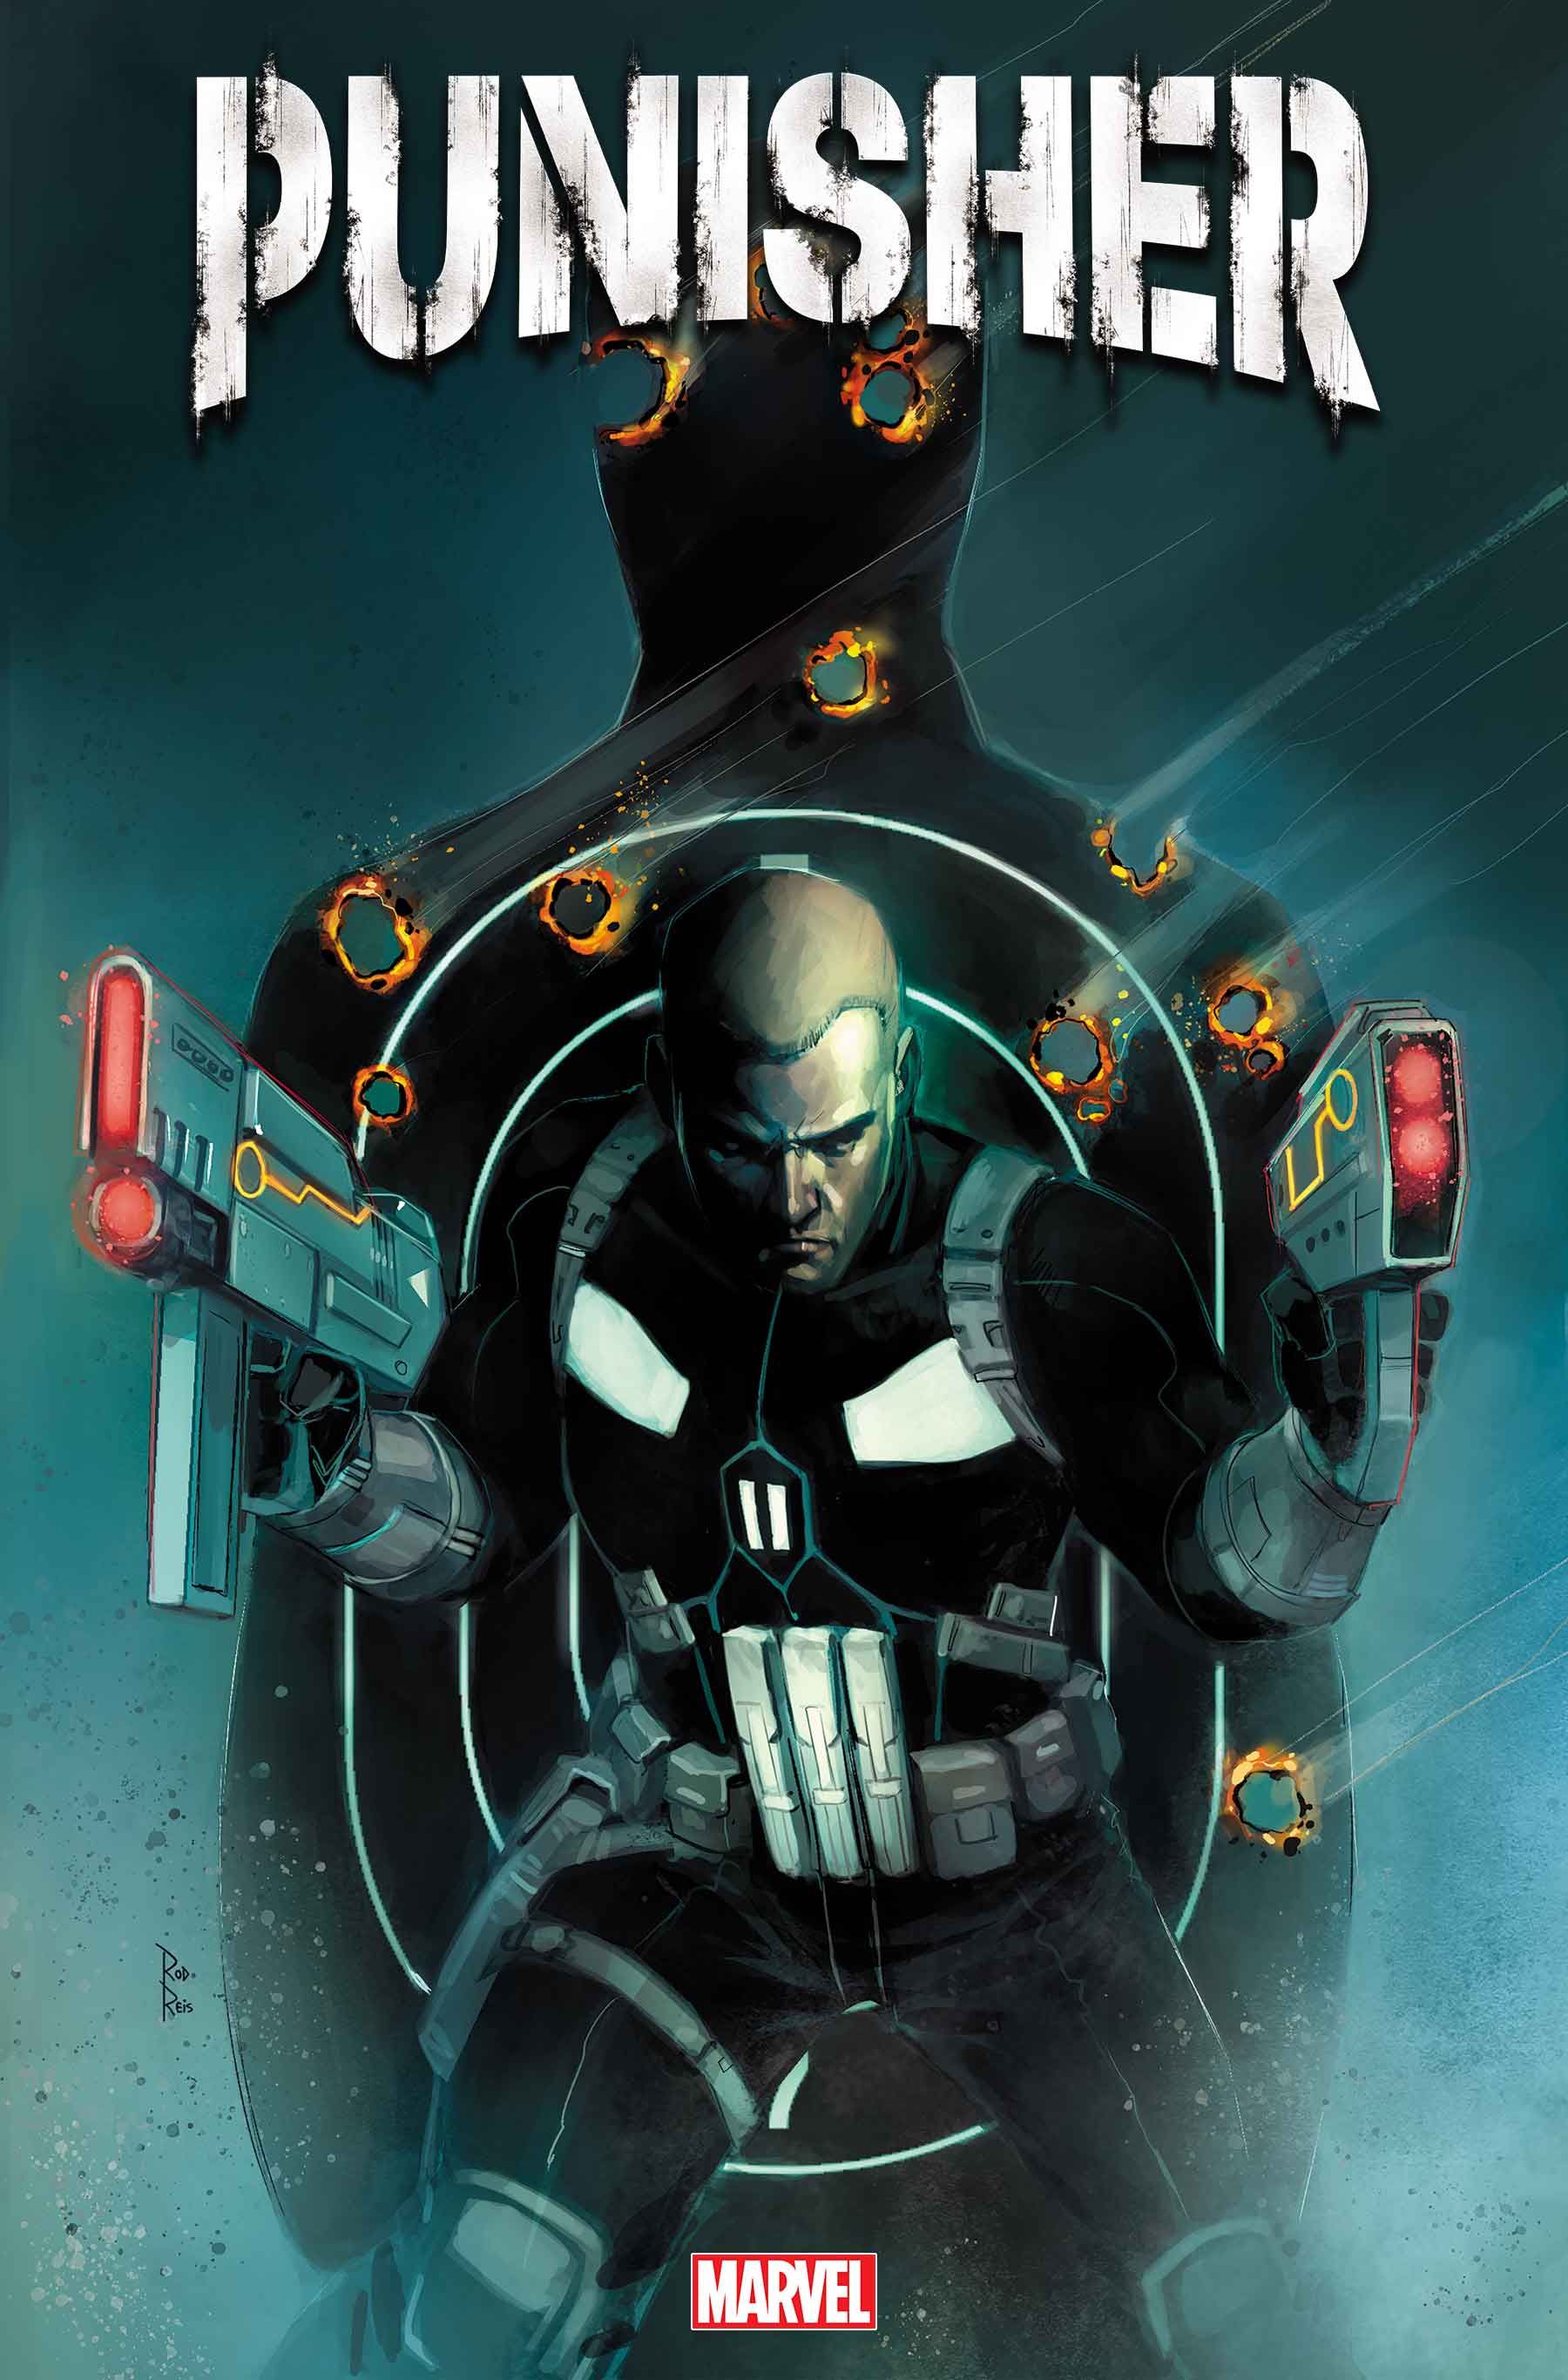 Punisher #1 Review